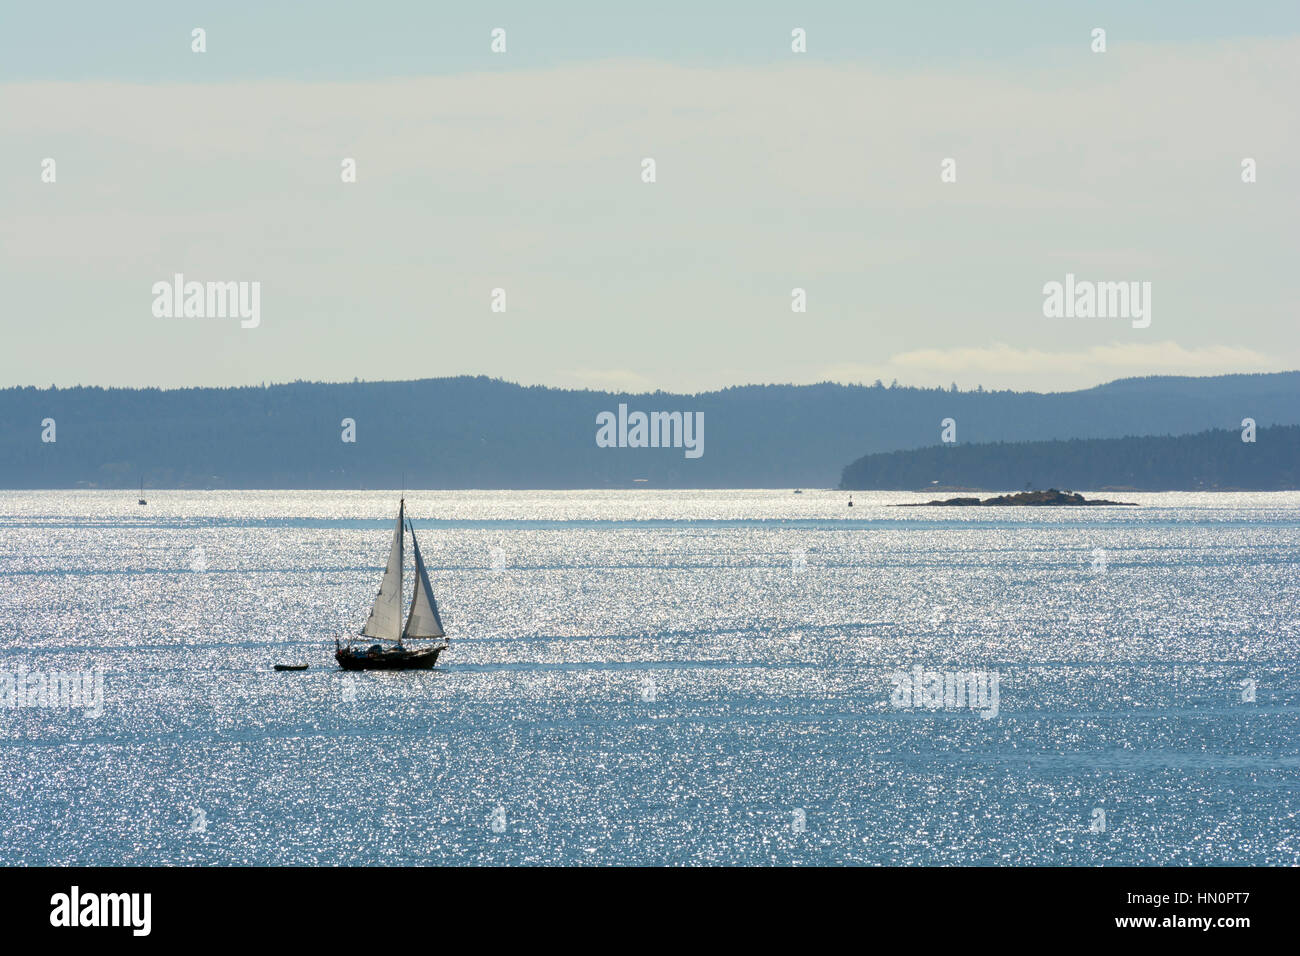 A back lit sailboat on the ocean with Islands in the background. Stock Photo